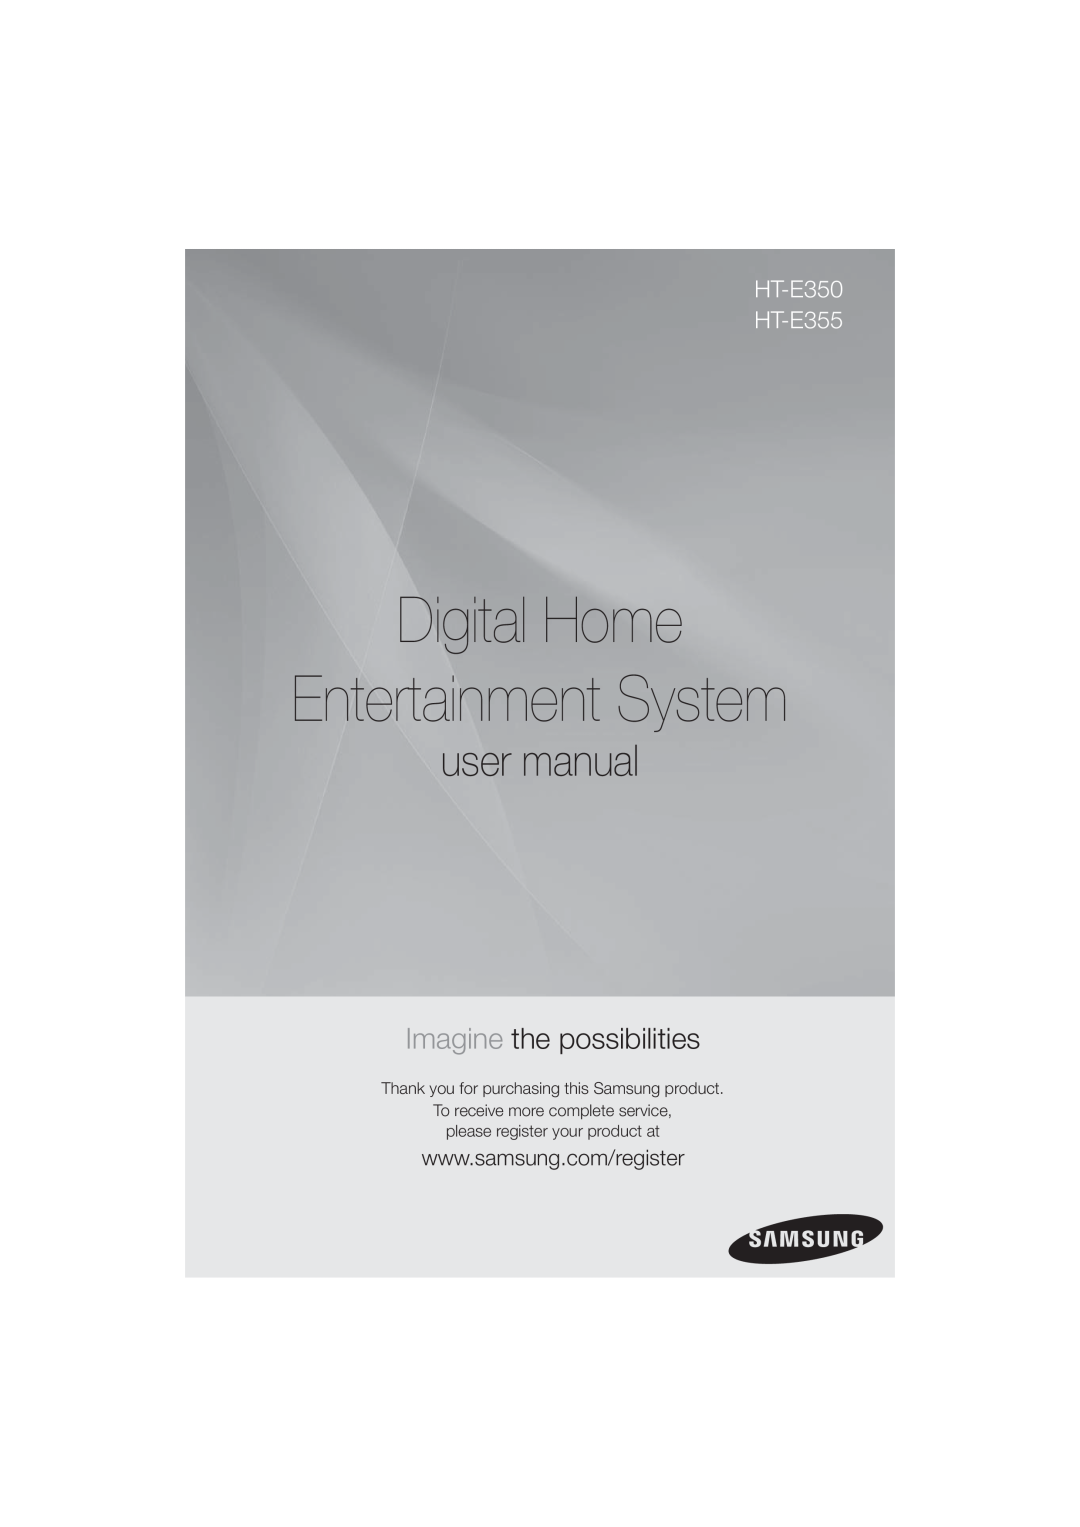 Samsung HT-355, HT-E350 user manual Thank you for purchasing this Samsung product, To receive more complete service 